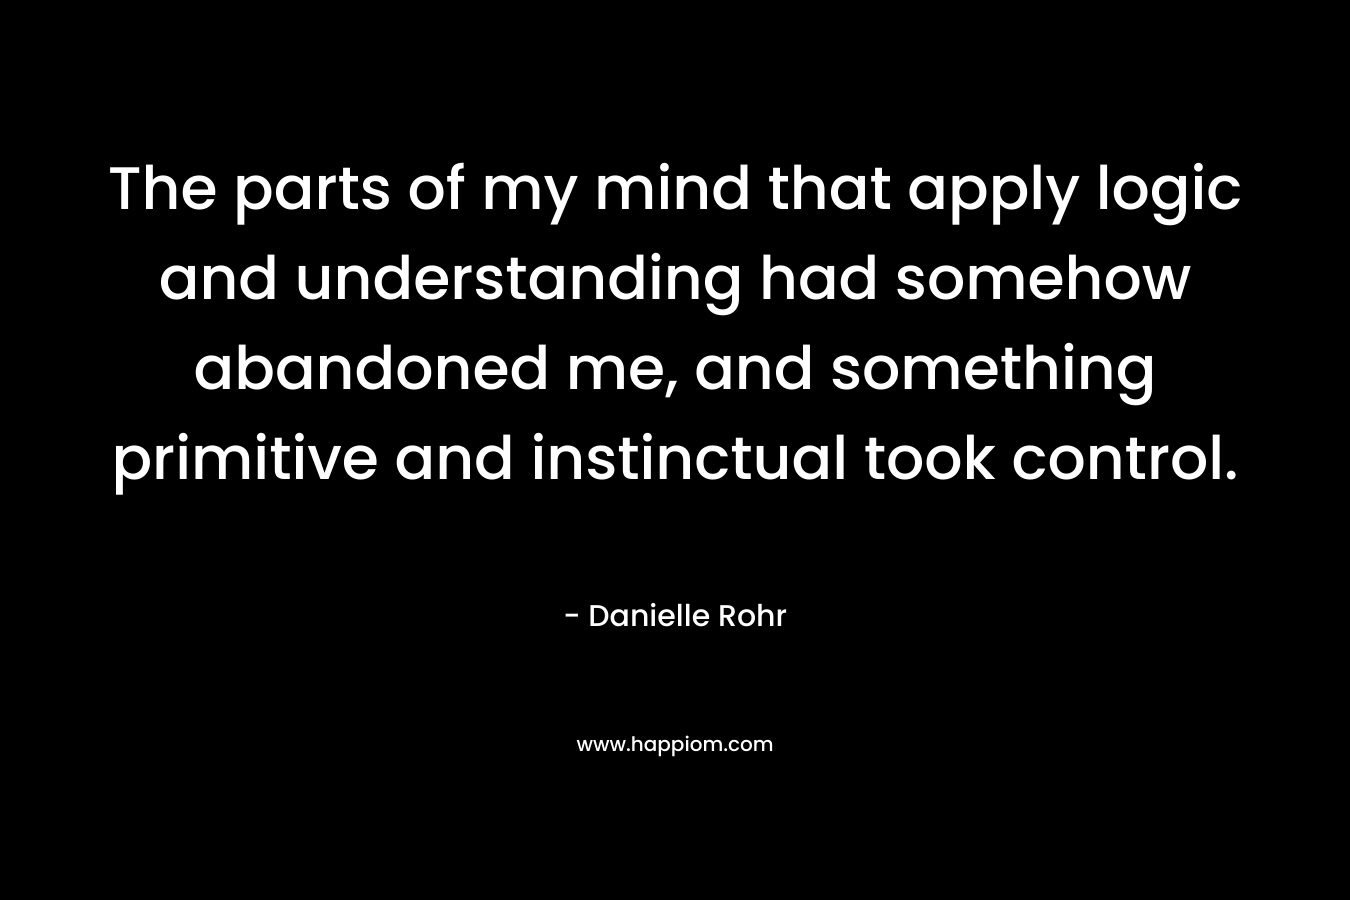 The parts of my mind that apply logic and understanding had somehow abandoned me, and something primitive and instinctual took control. – Danielle Rohr